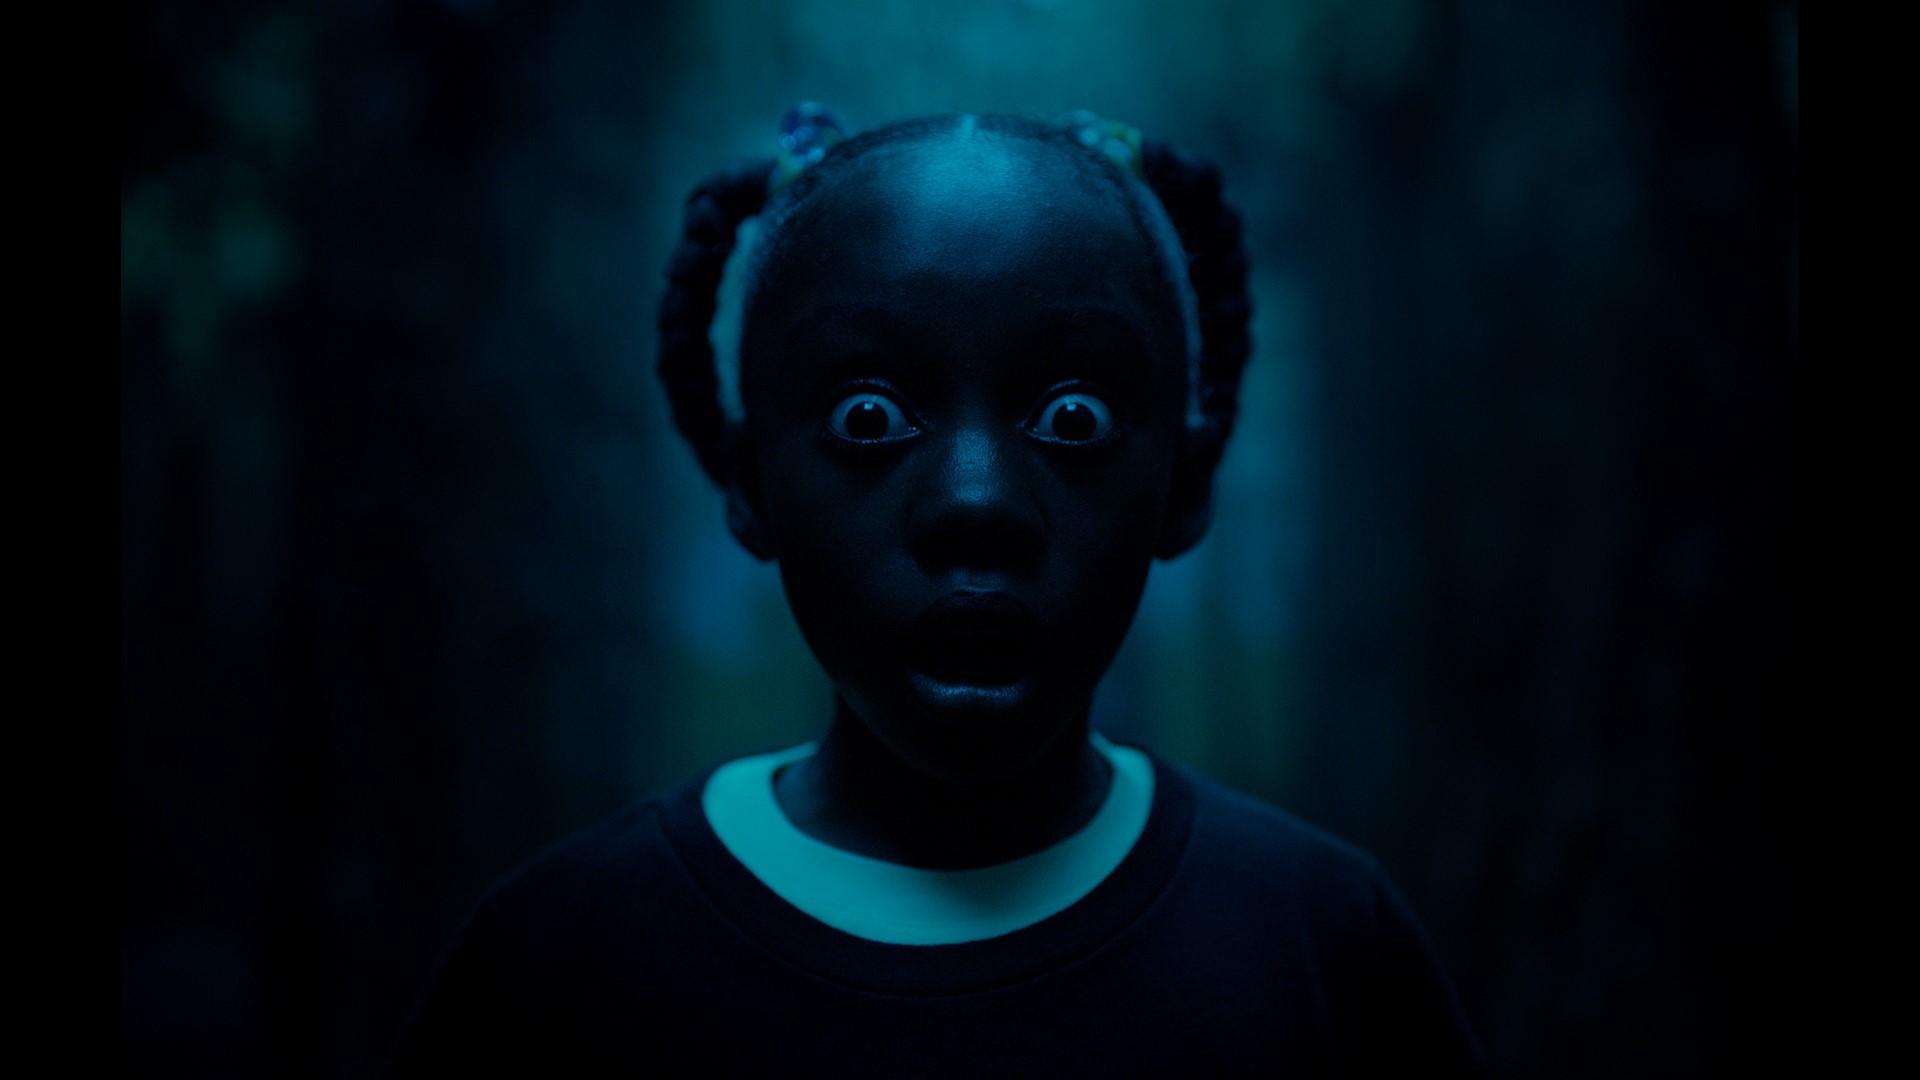 Jordan Peele's 'Us' hit the box office to bring springtime chills. Director Shawn Hobbs has the latest list of movies to see.